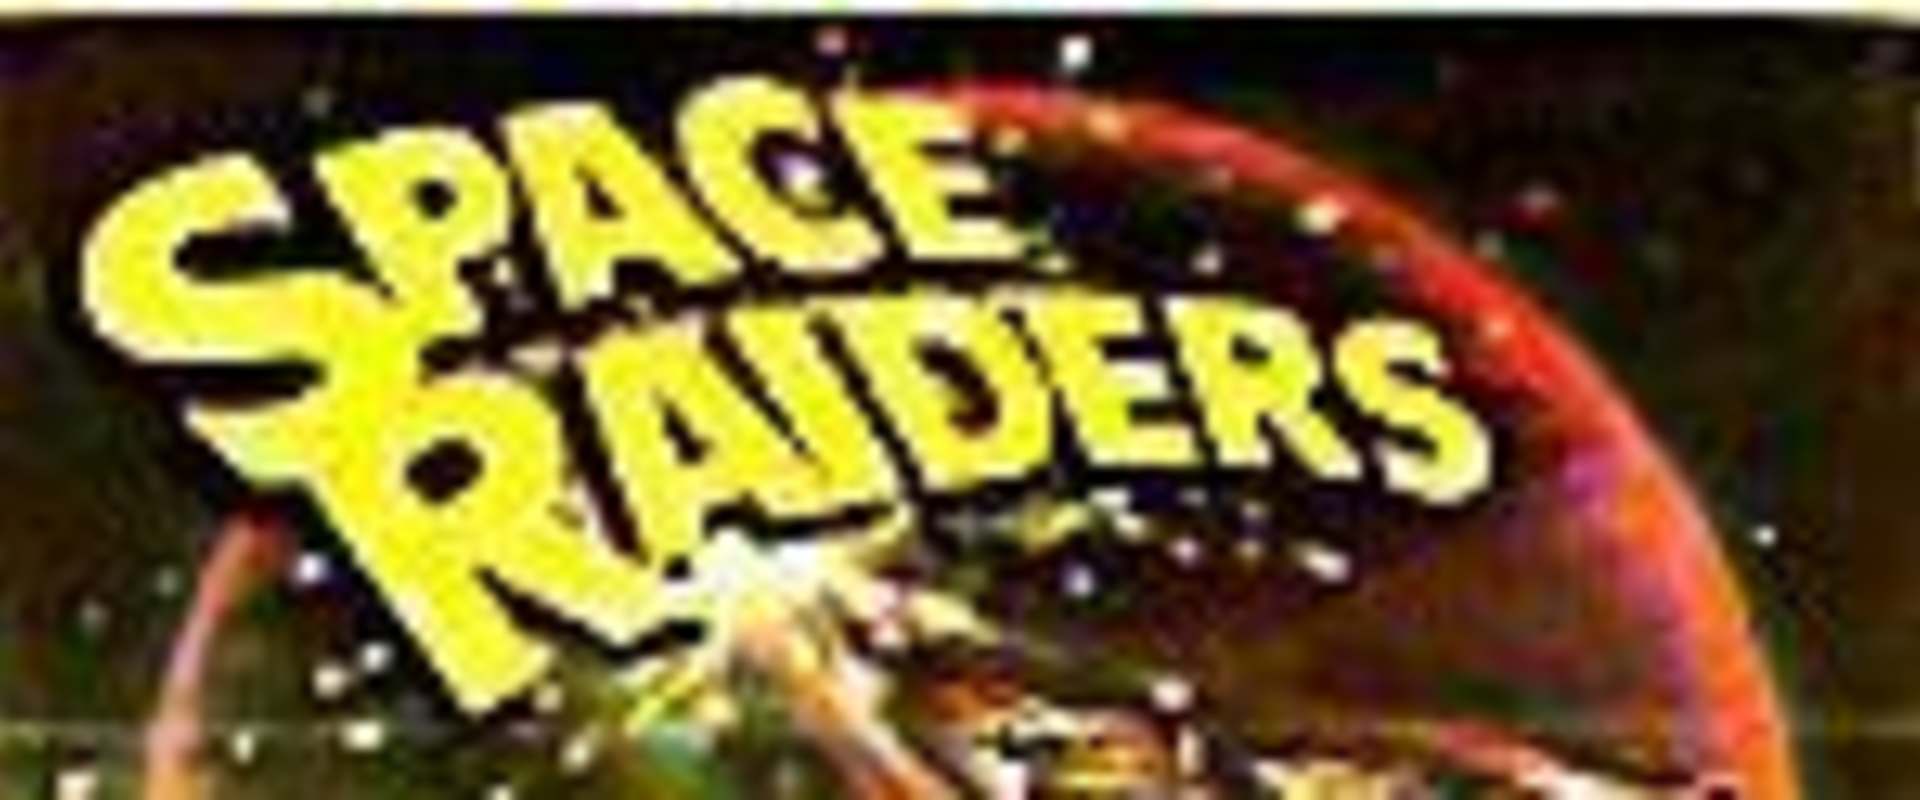 Space Raiders background 2